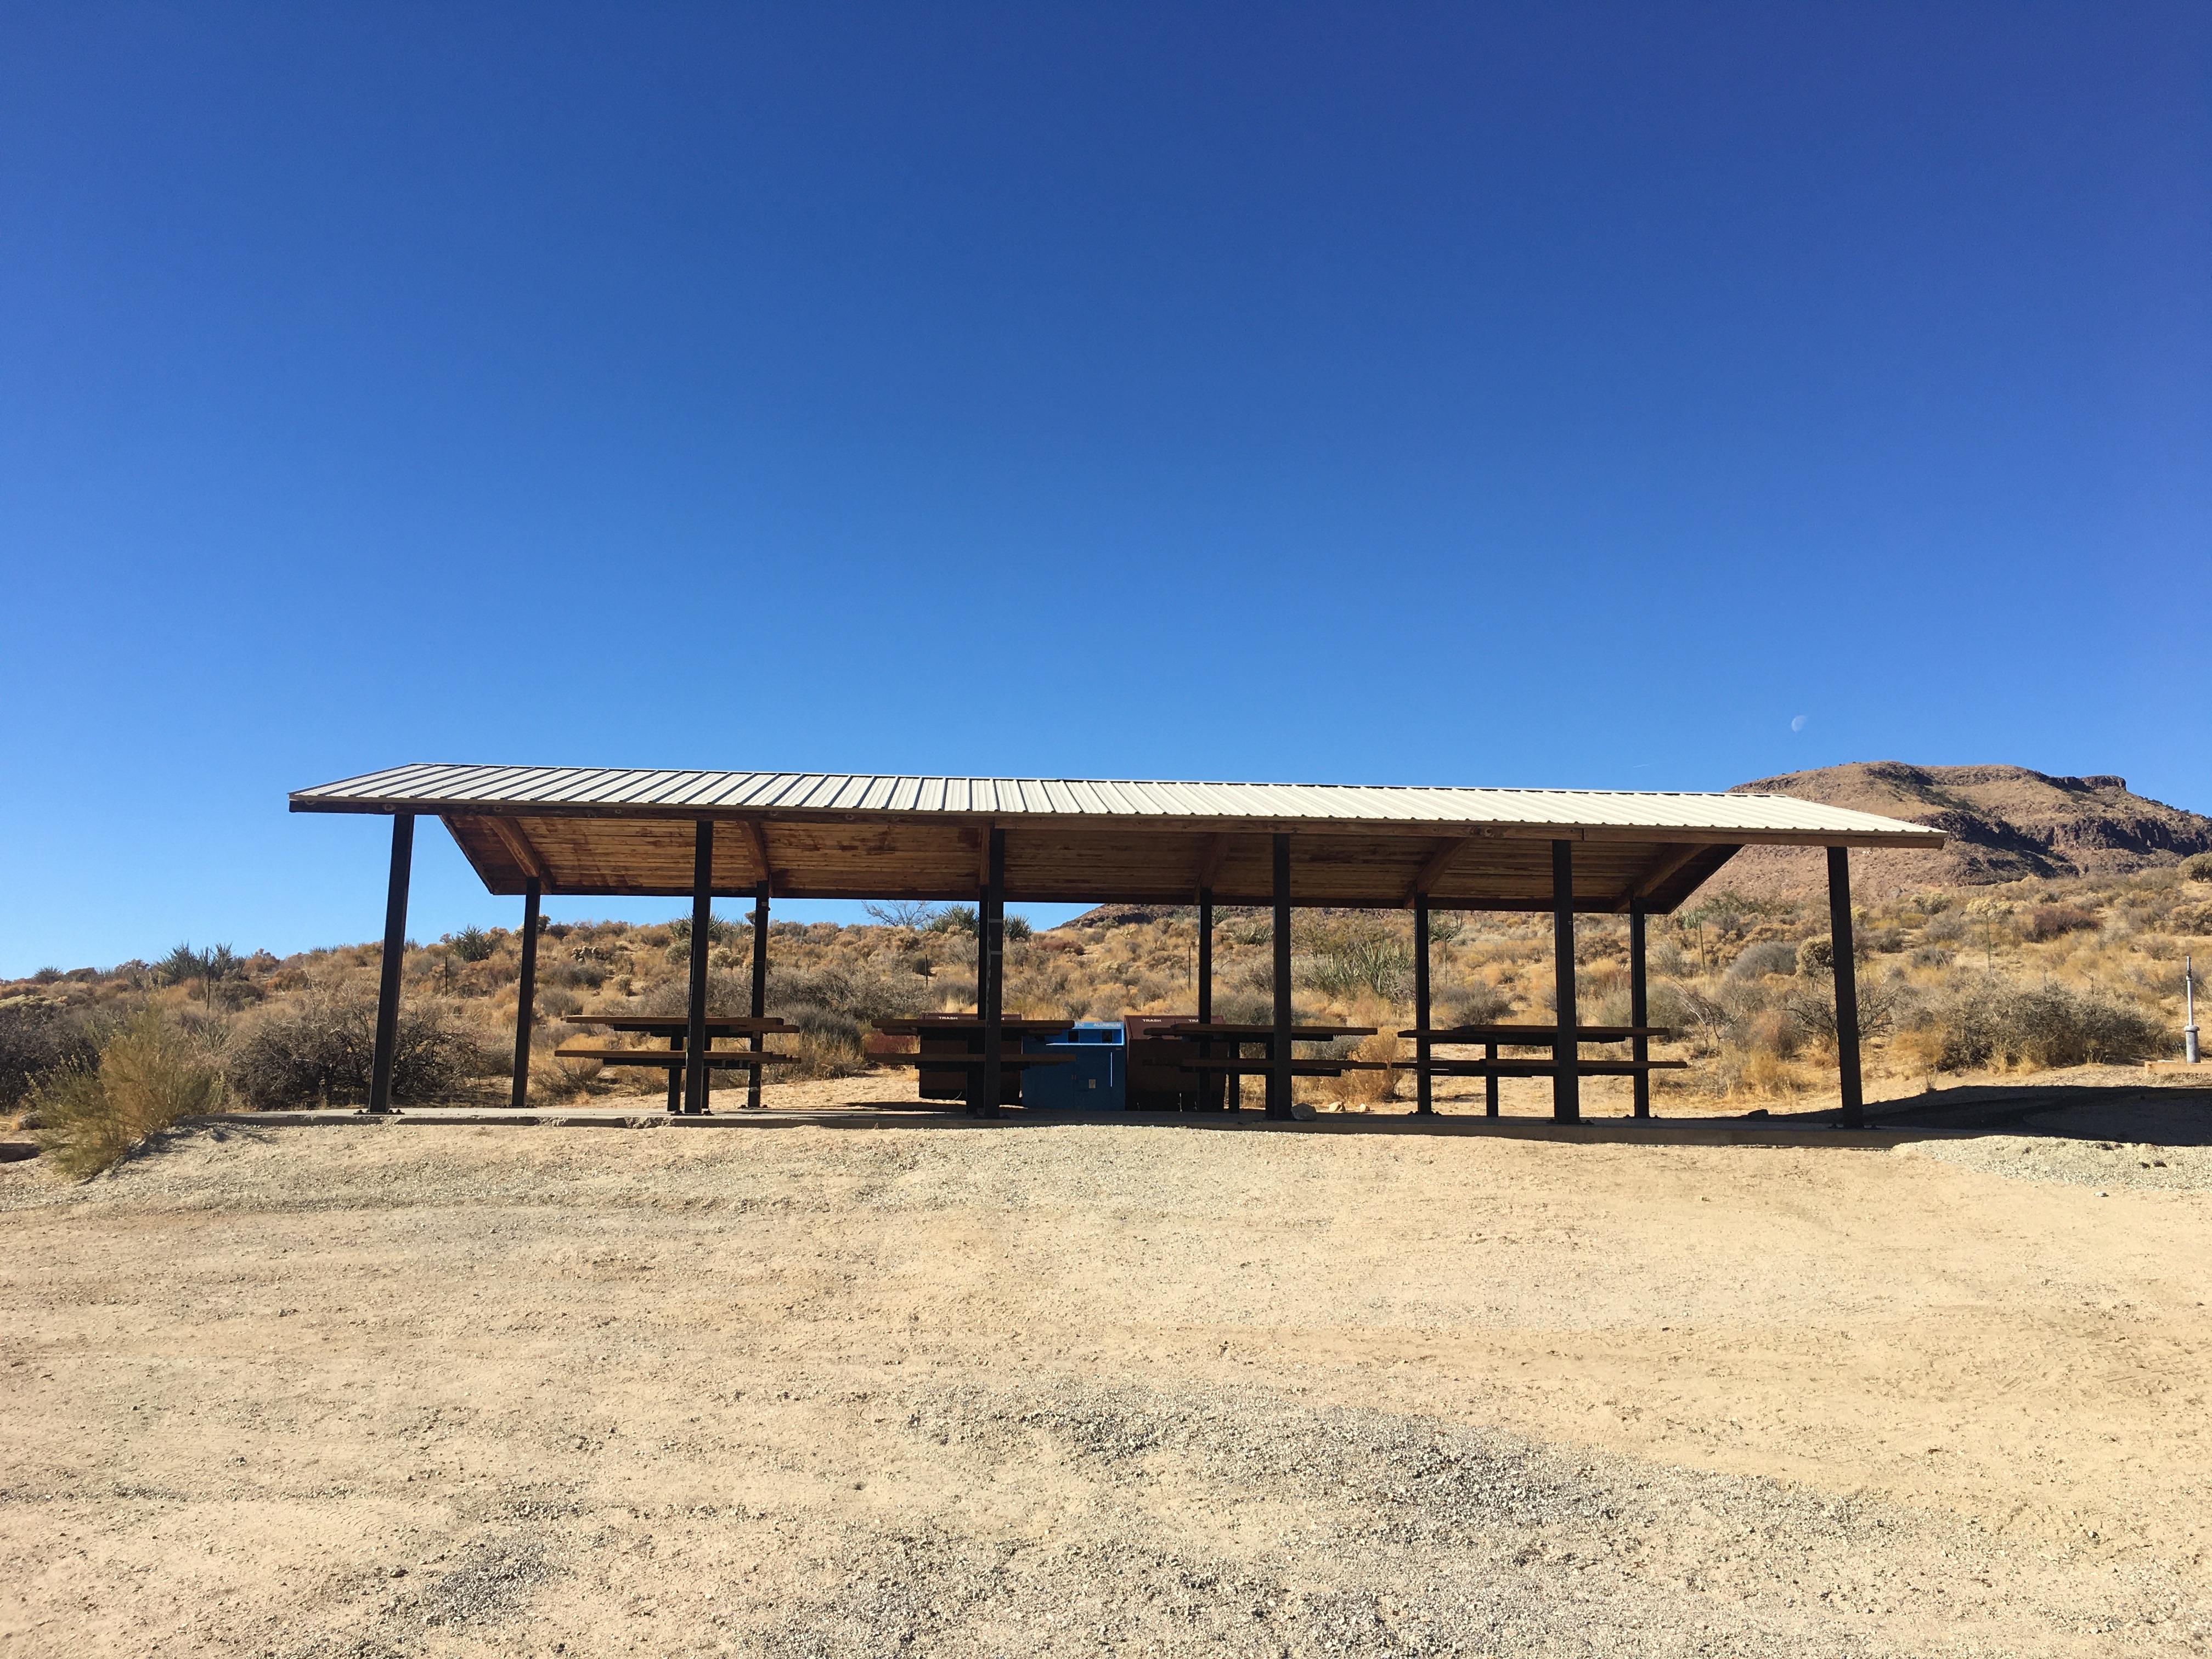 A shade structure consisting of beams holding up a solid roof. Underneath are six picnic tables.